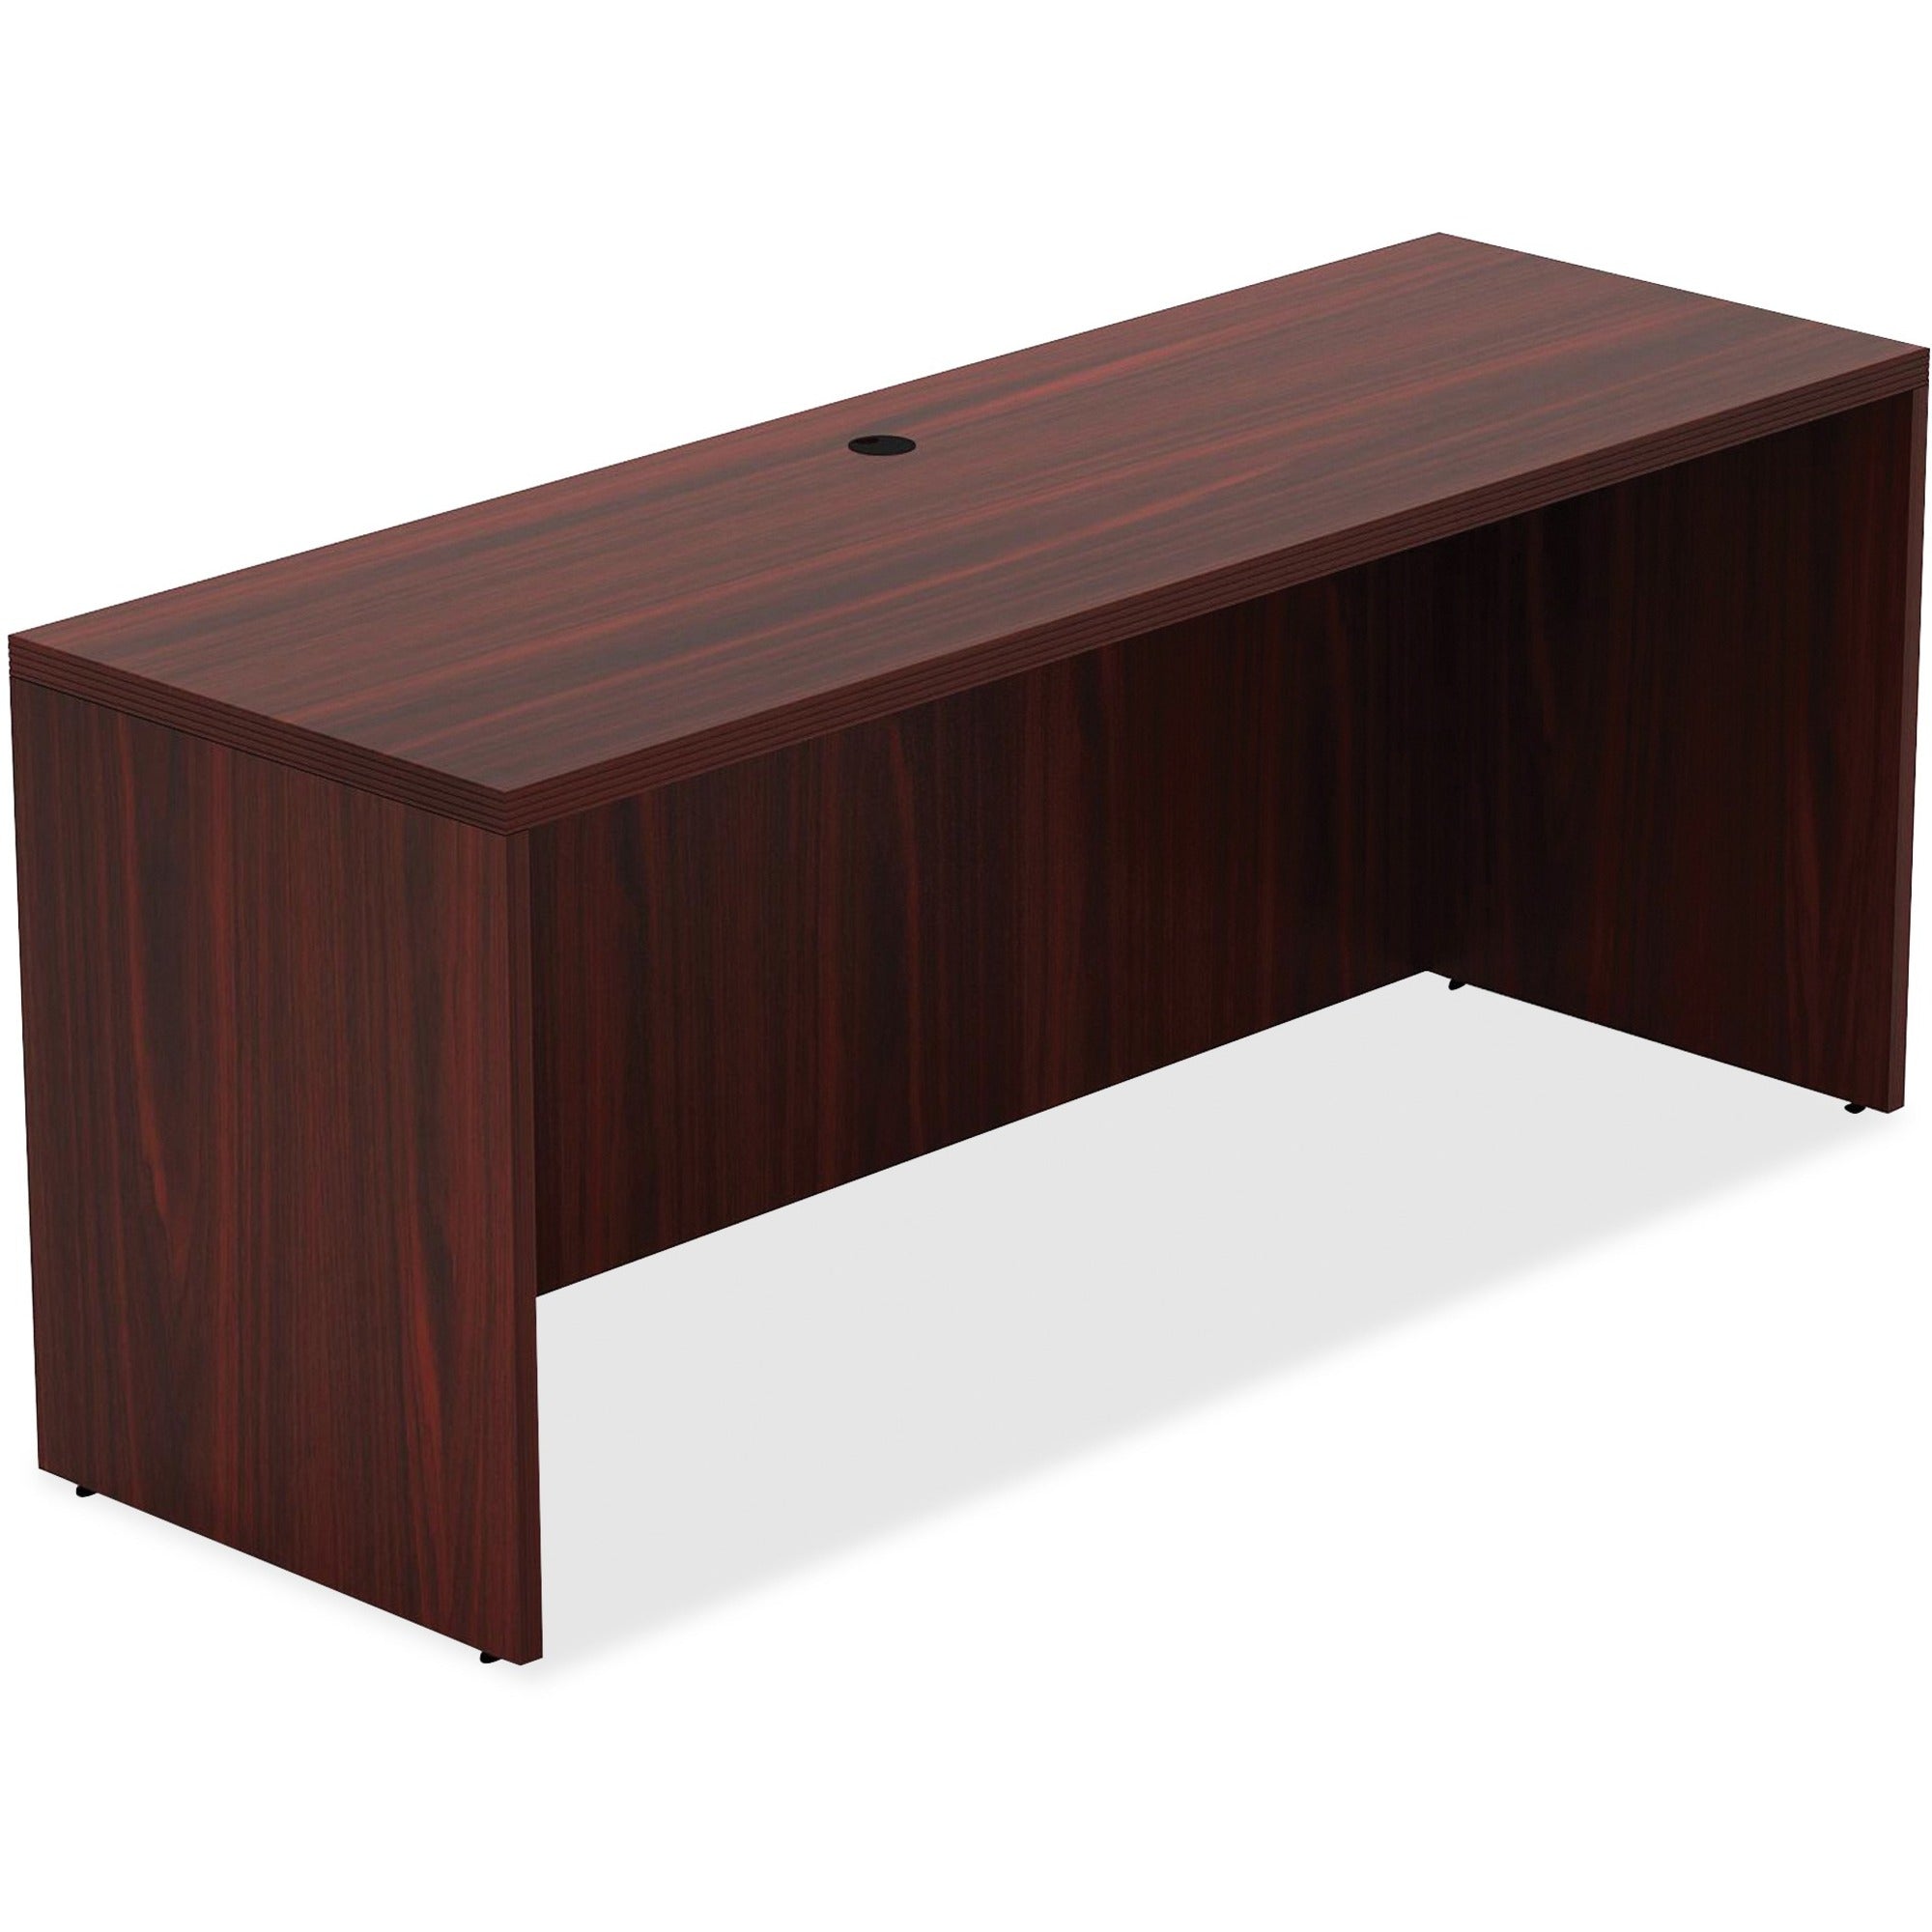 Lorell Chateau Series Credenza - 70.9" x 23.6"30" Credenza, 1.5" Top - Reeded Edge - Material: P2 Particleboard - Finish: Mahogany, Laminate - Durable, Grommet, Cord Management, Modesty Panel - For Office - 